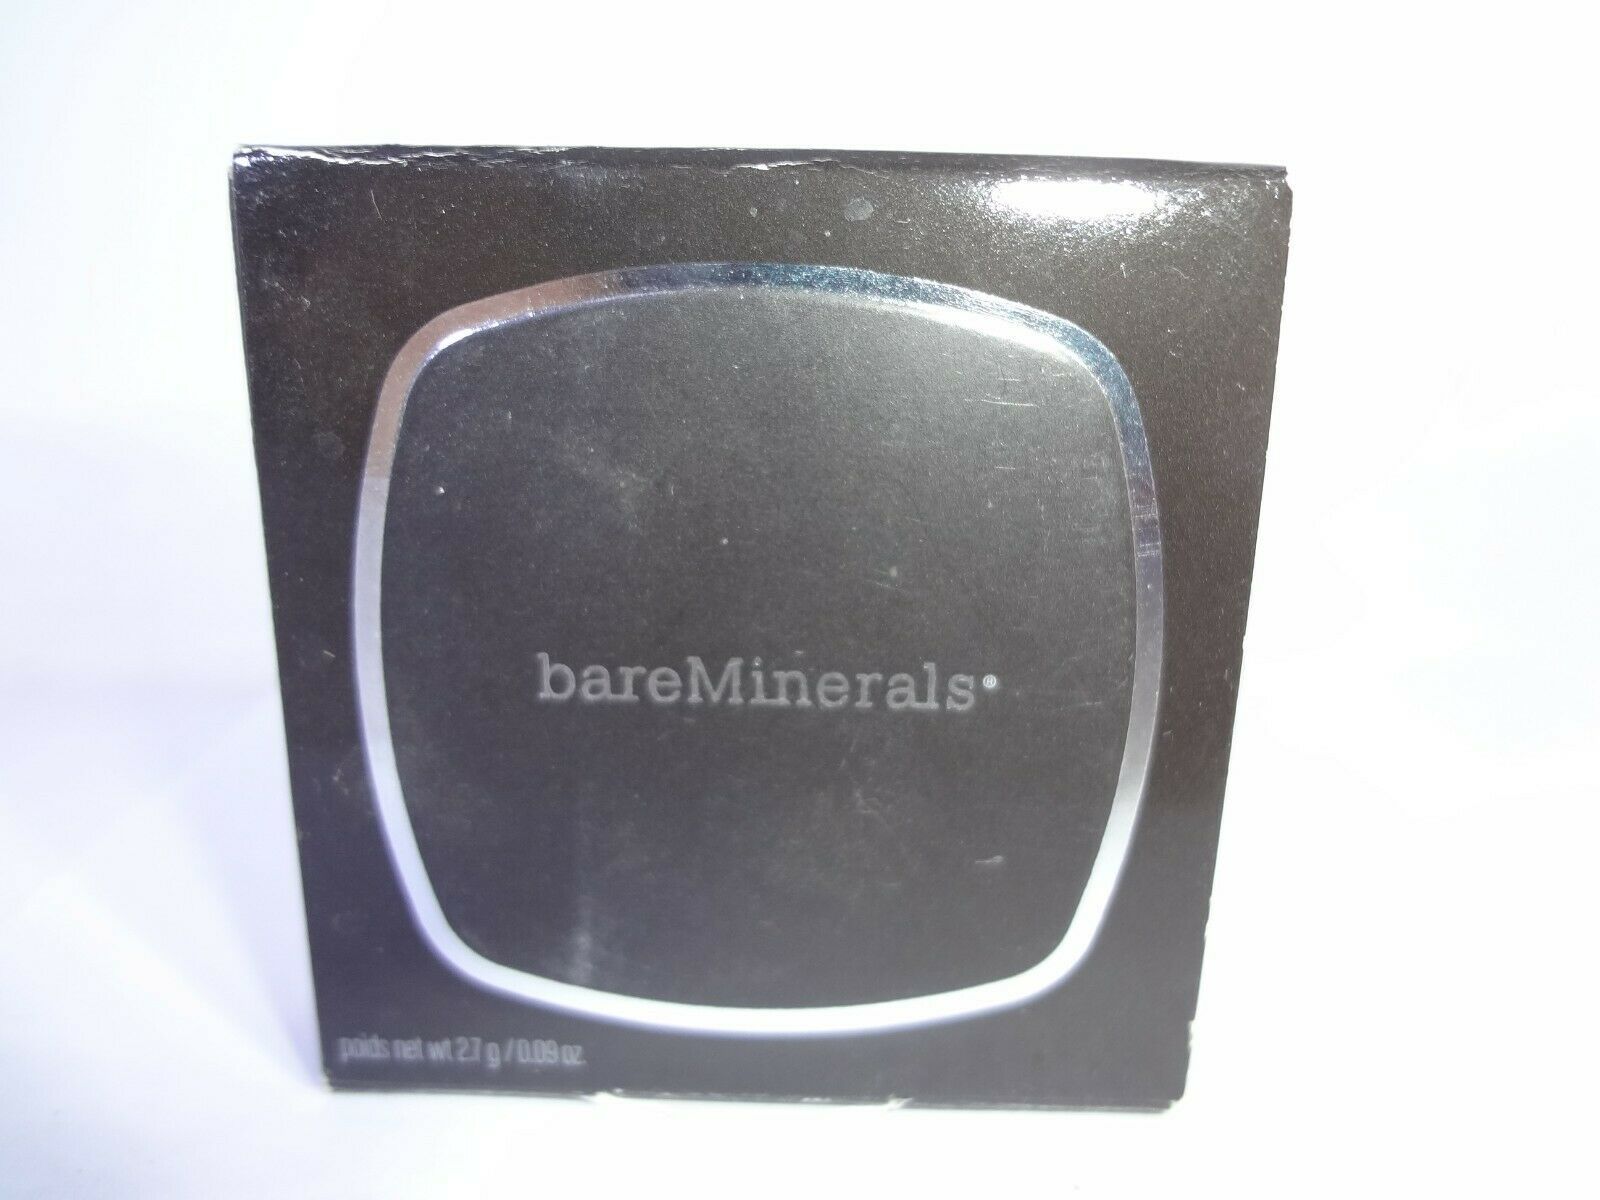 Primary image for bareMinerals Ready Eyeshadow 2.0 The Hollywood Ending [HB-B]